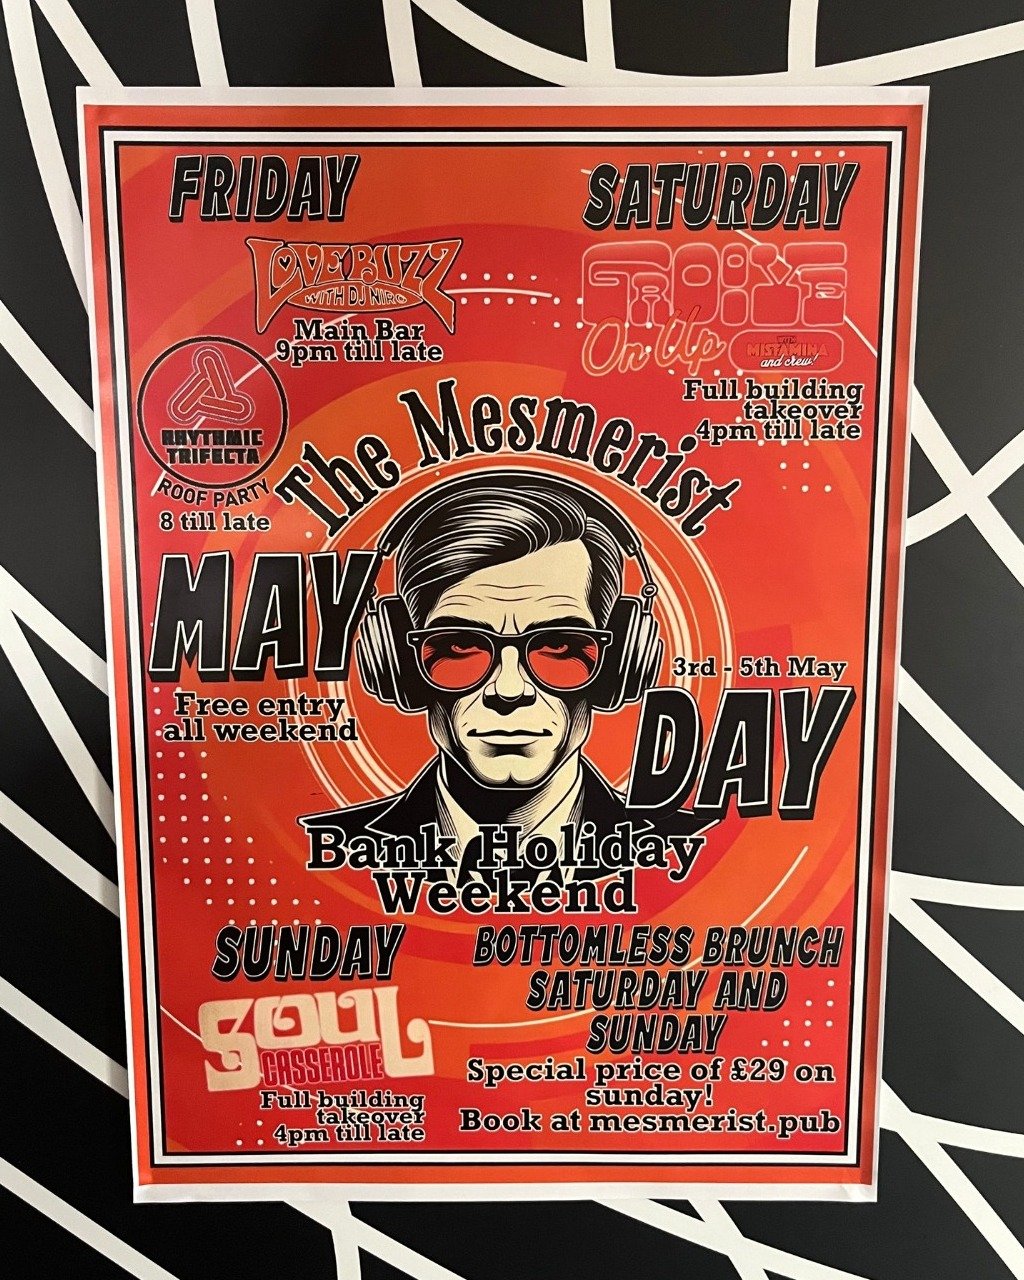 MAYDAY BANK HOLIDAY WEEKEND LINEUP

Oh what a weekend we have in store for you! Get ready for live DJs across the venue all weekend long, with Main bar and Roof terrace DJs on Friday and full building takeovers Saturday and Sunday 🤩

As well as this